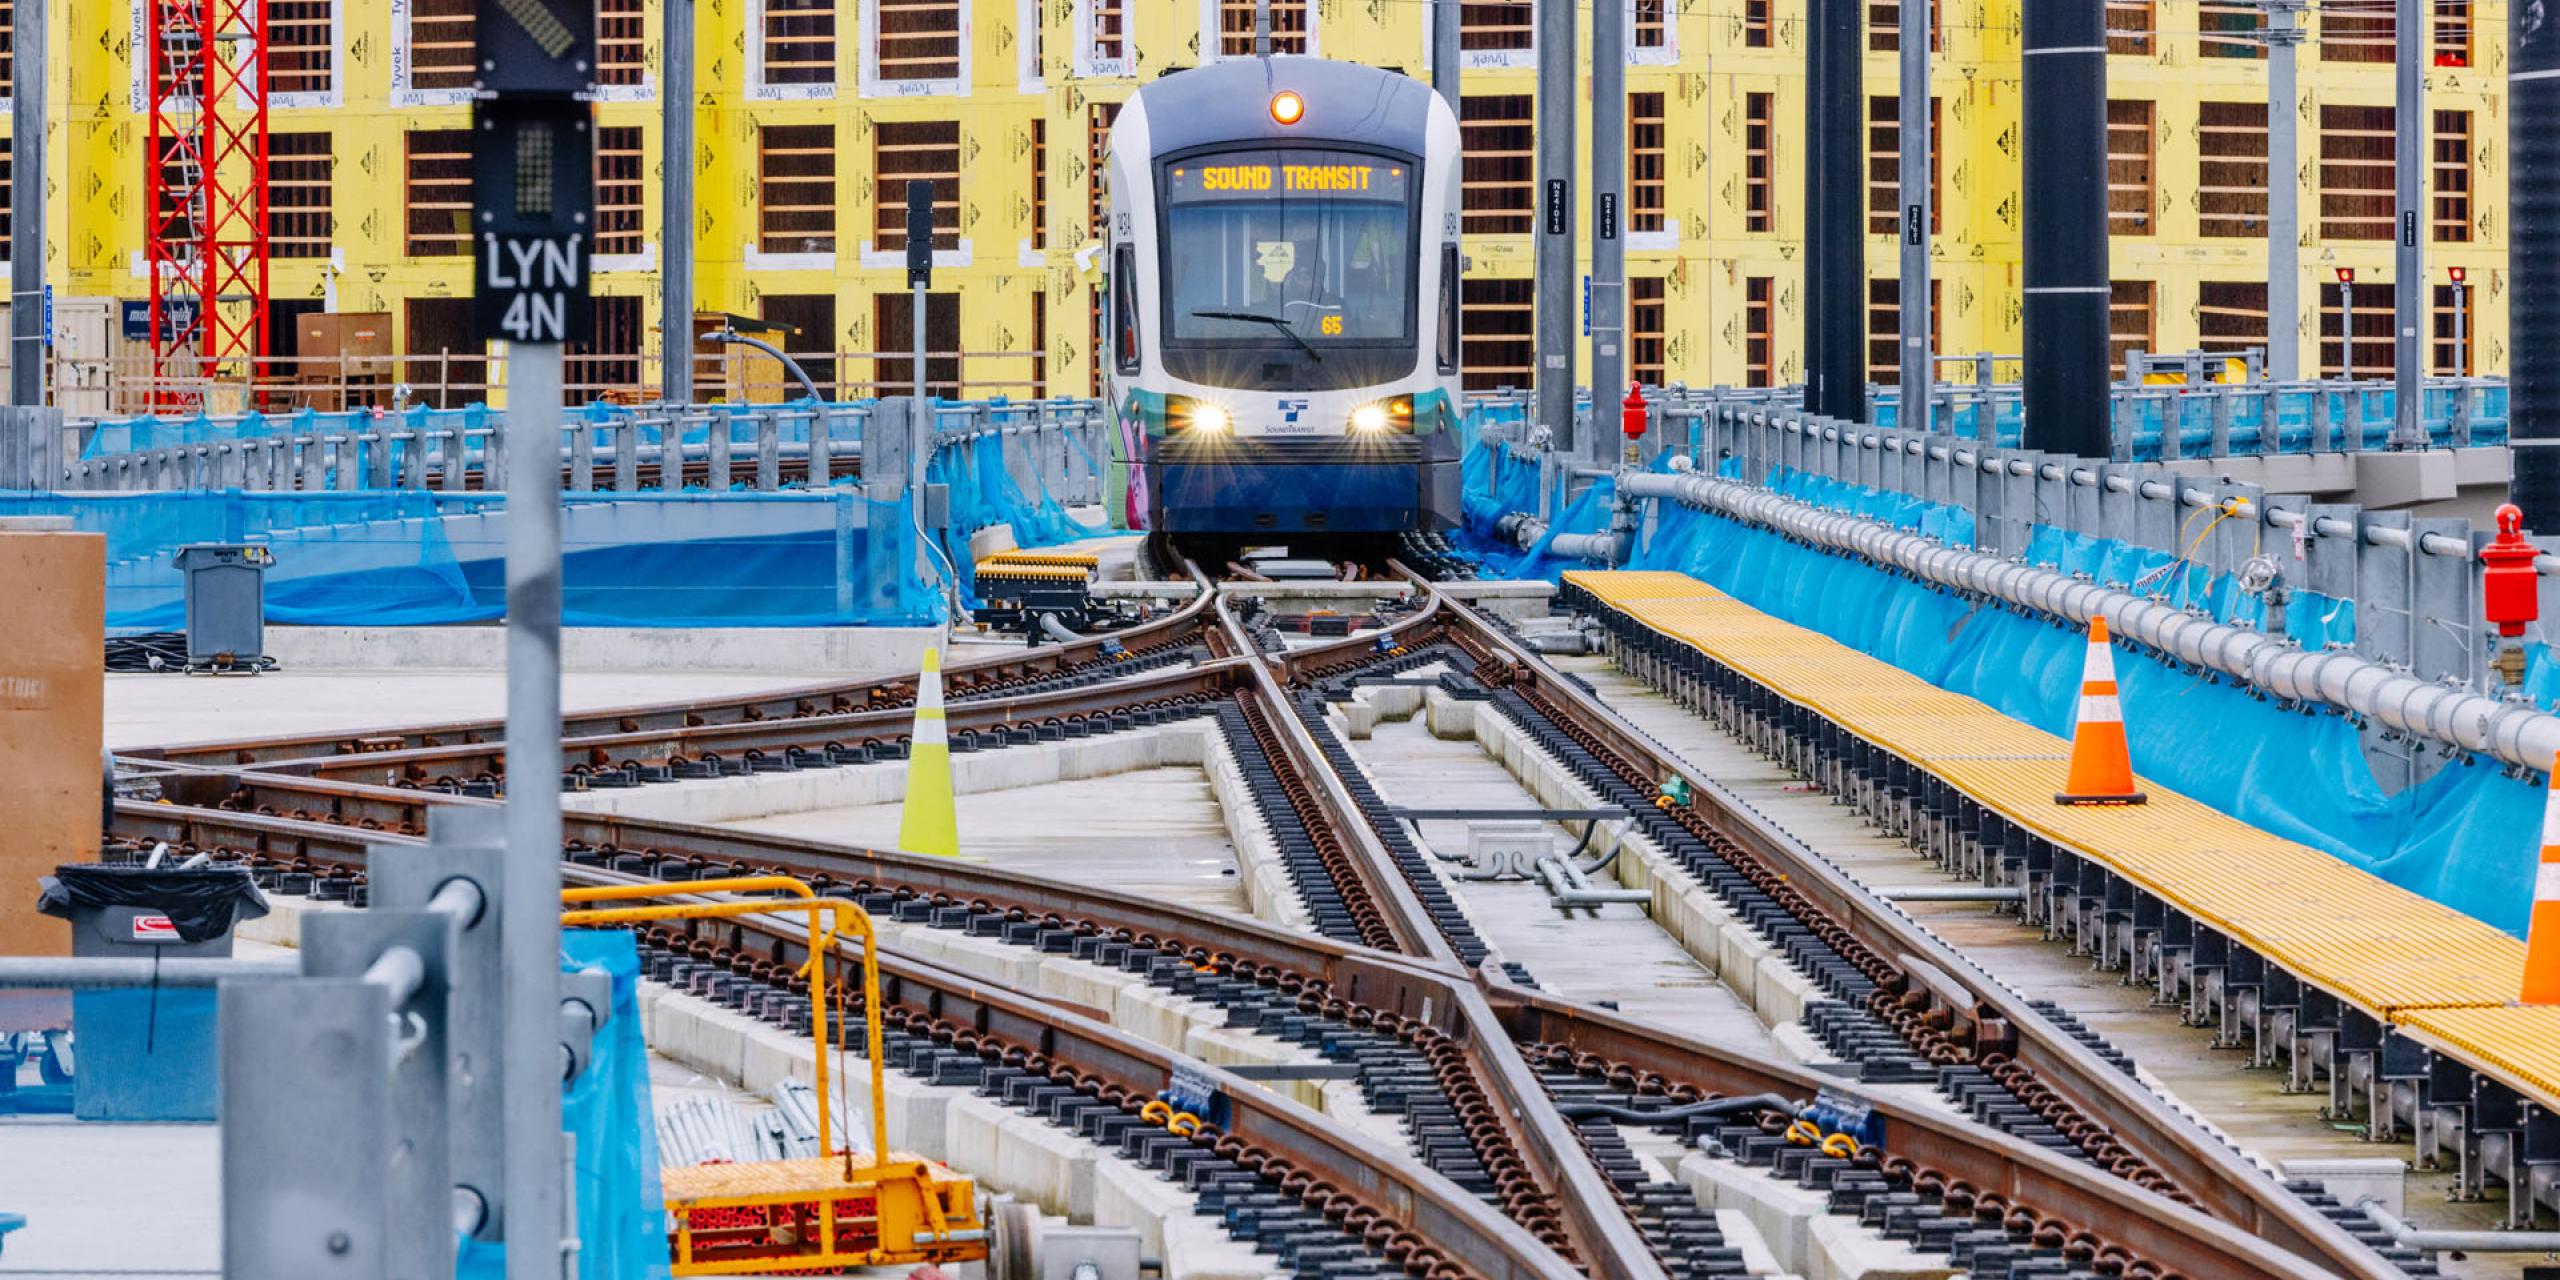 A light rail train in Lynnwood with construction in the background.